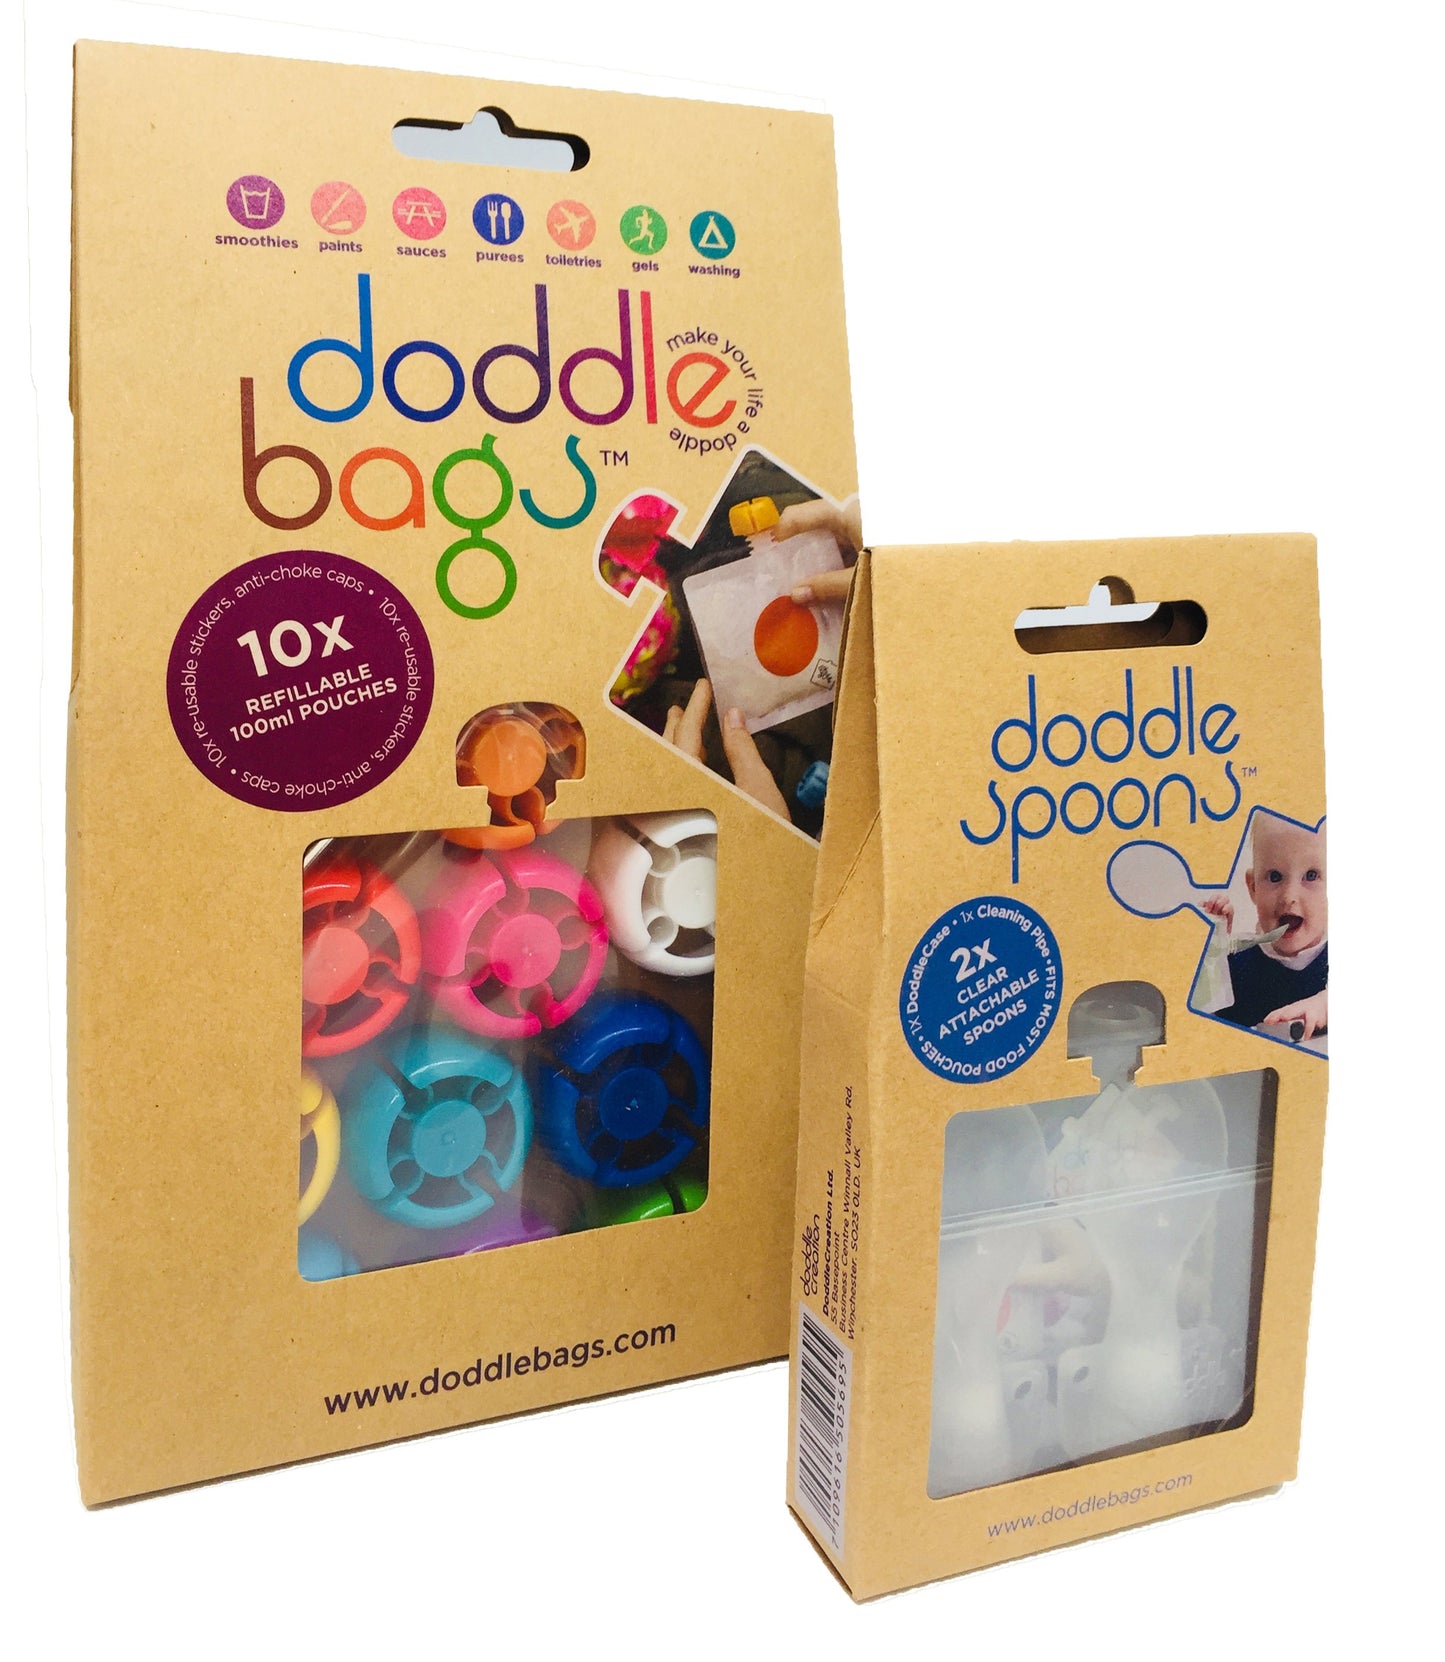 NEW! Spoon Attachment Pack - DoddleBags Food Pouches